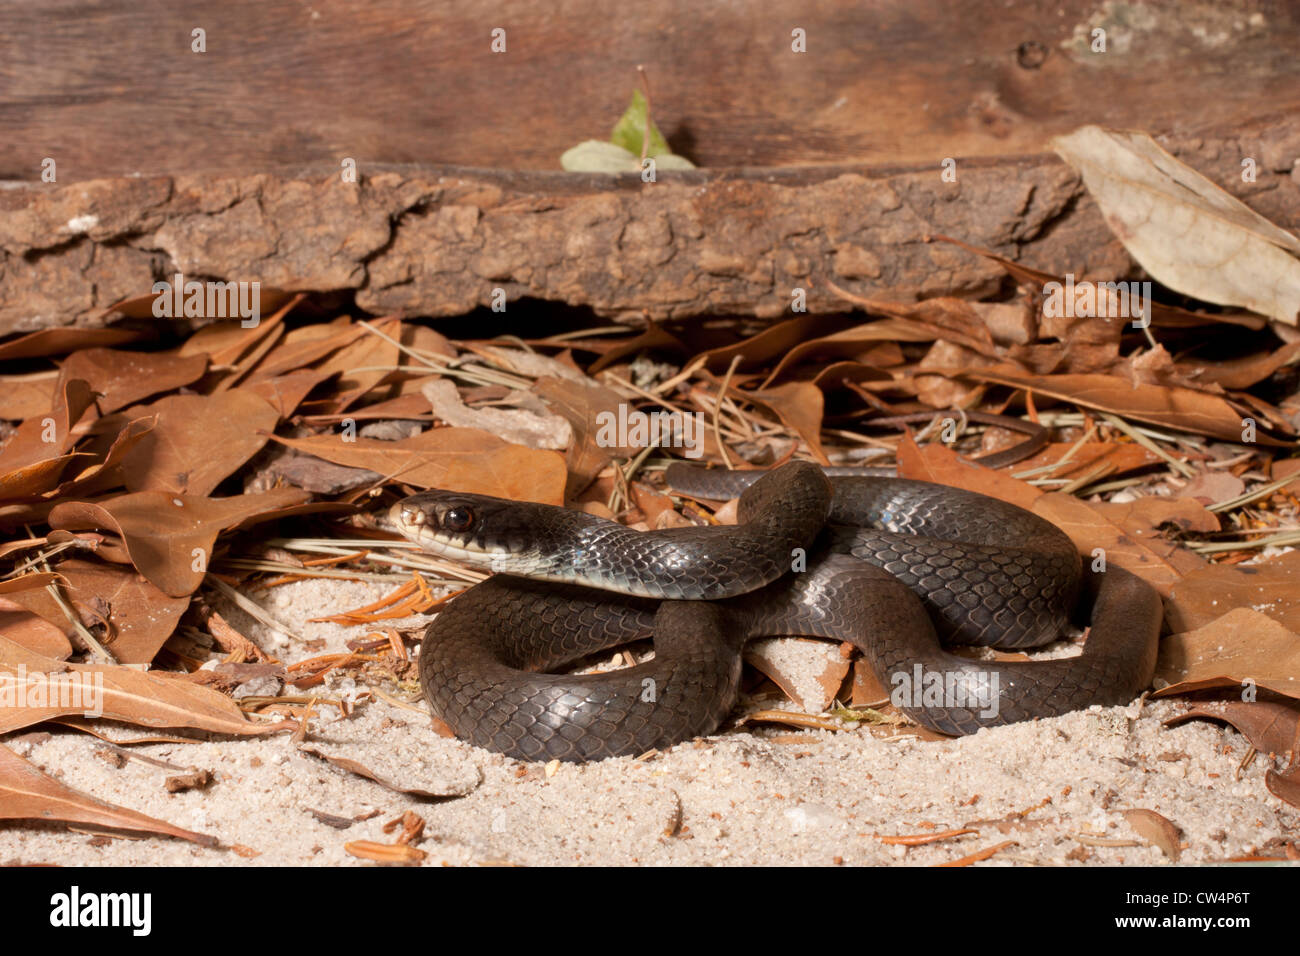 Northern black racer - Coluber constrictor constrictor Stock Photo